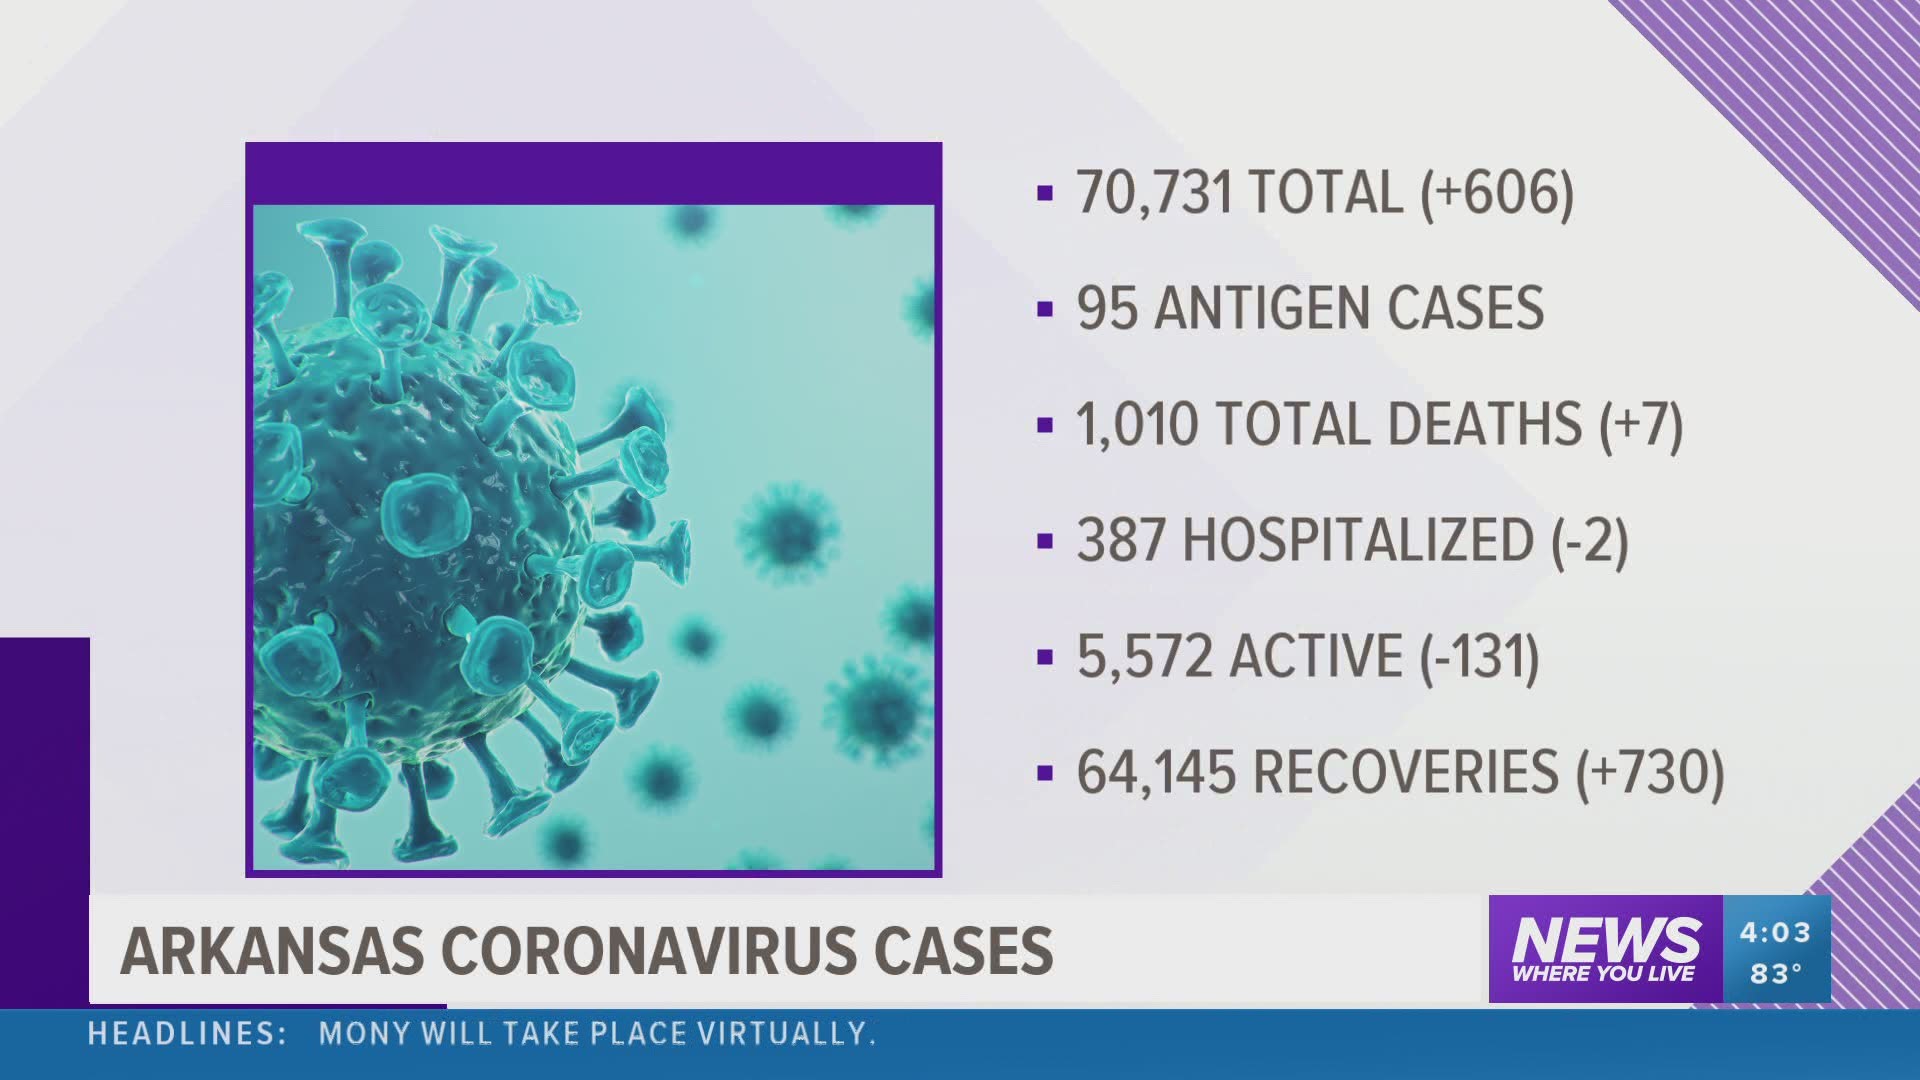 A look at the latest case numbers for the coronavirus in Arkansas on Wednesday, September 16. https://bit.ly/3iqGRnx